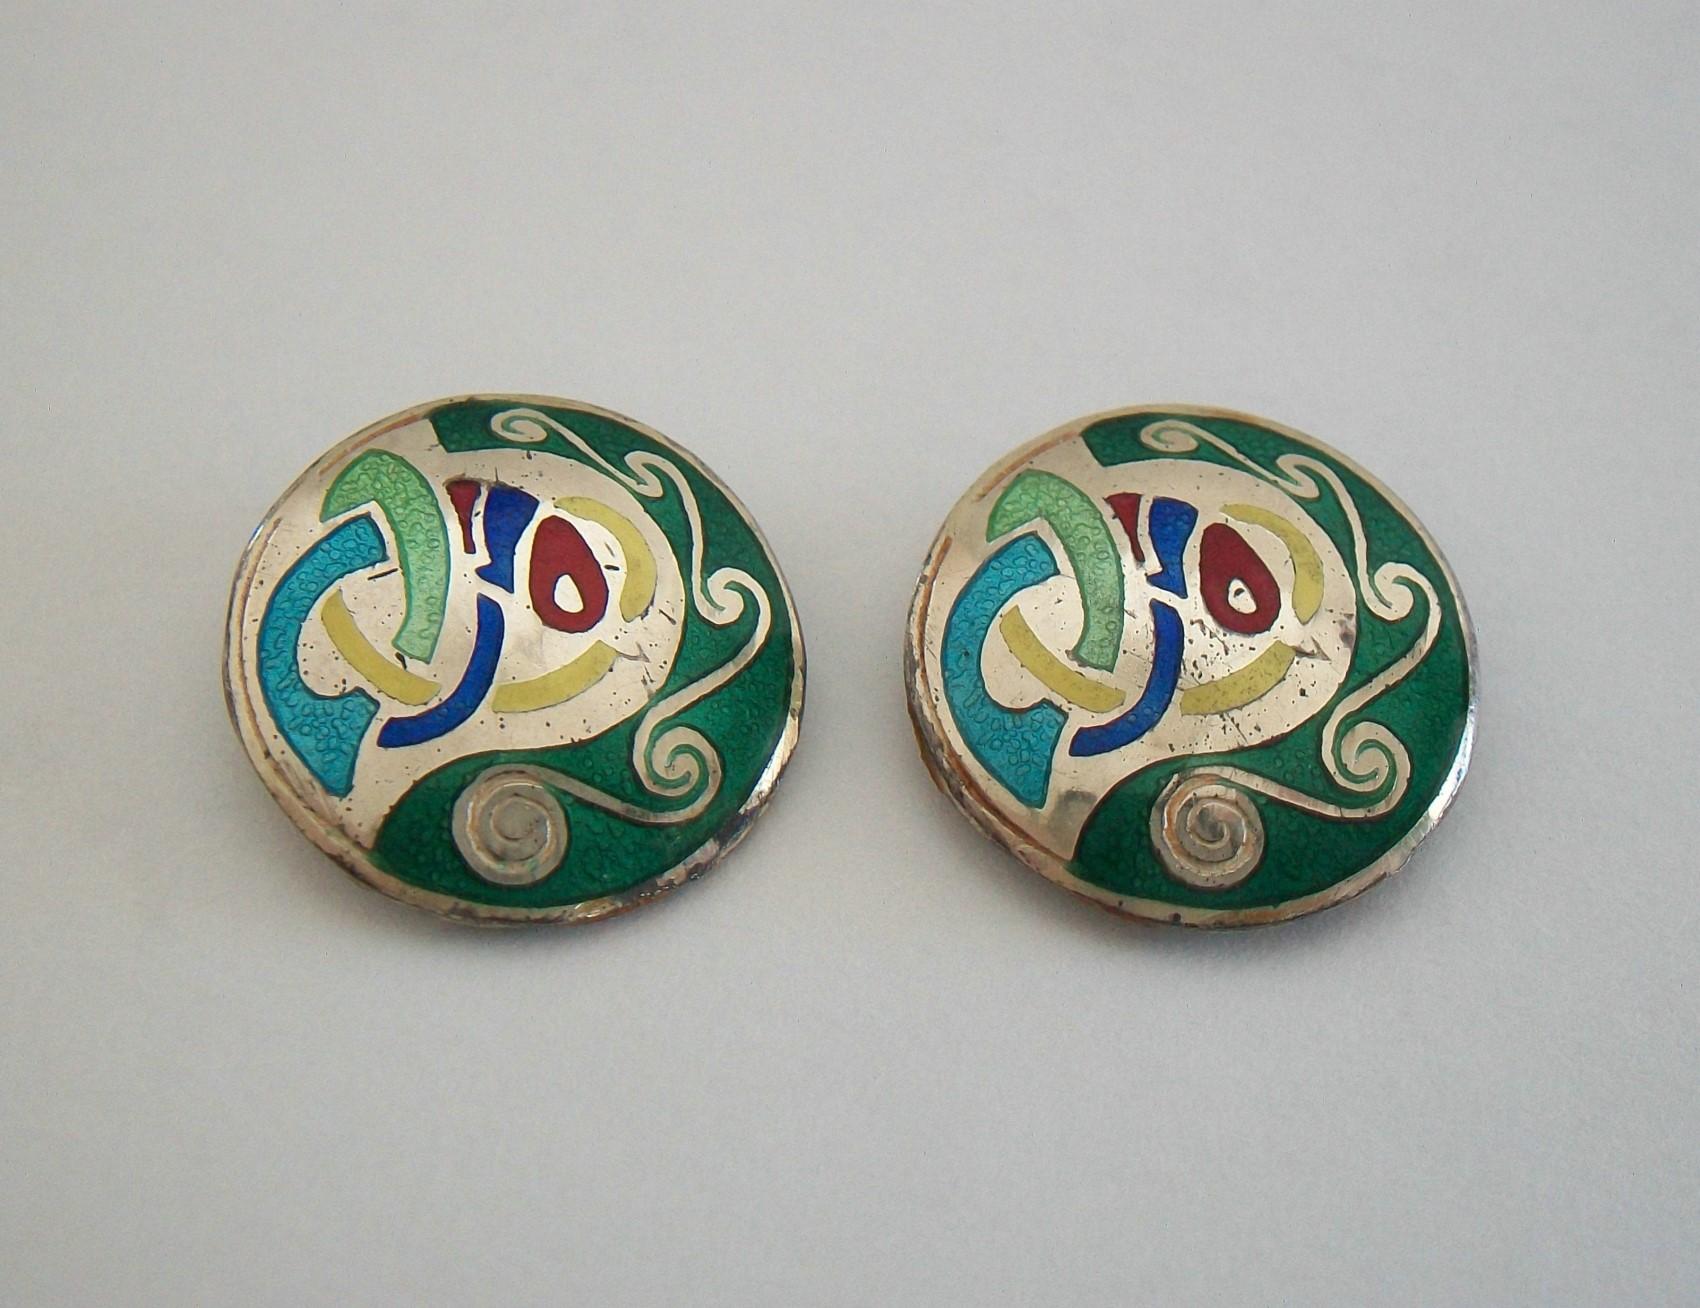 TARA WARE - Vintage pair of sterling silver and enamel earrings / ear clips - hand made - featuring Celtic designs with inset brightly colored enamels - maker's mark TW and full Irish silver hallmarks on the back of each earring (see photos) -